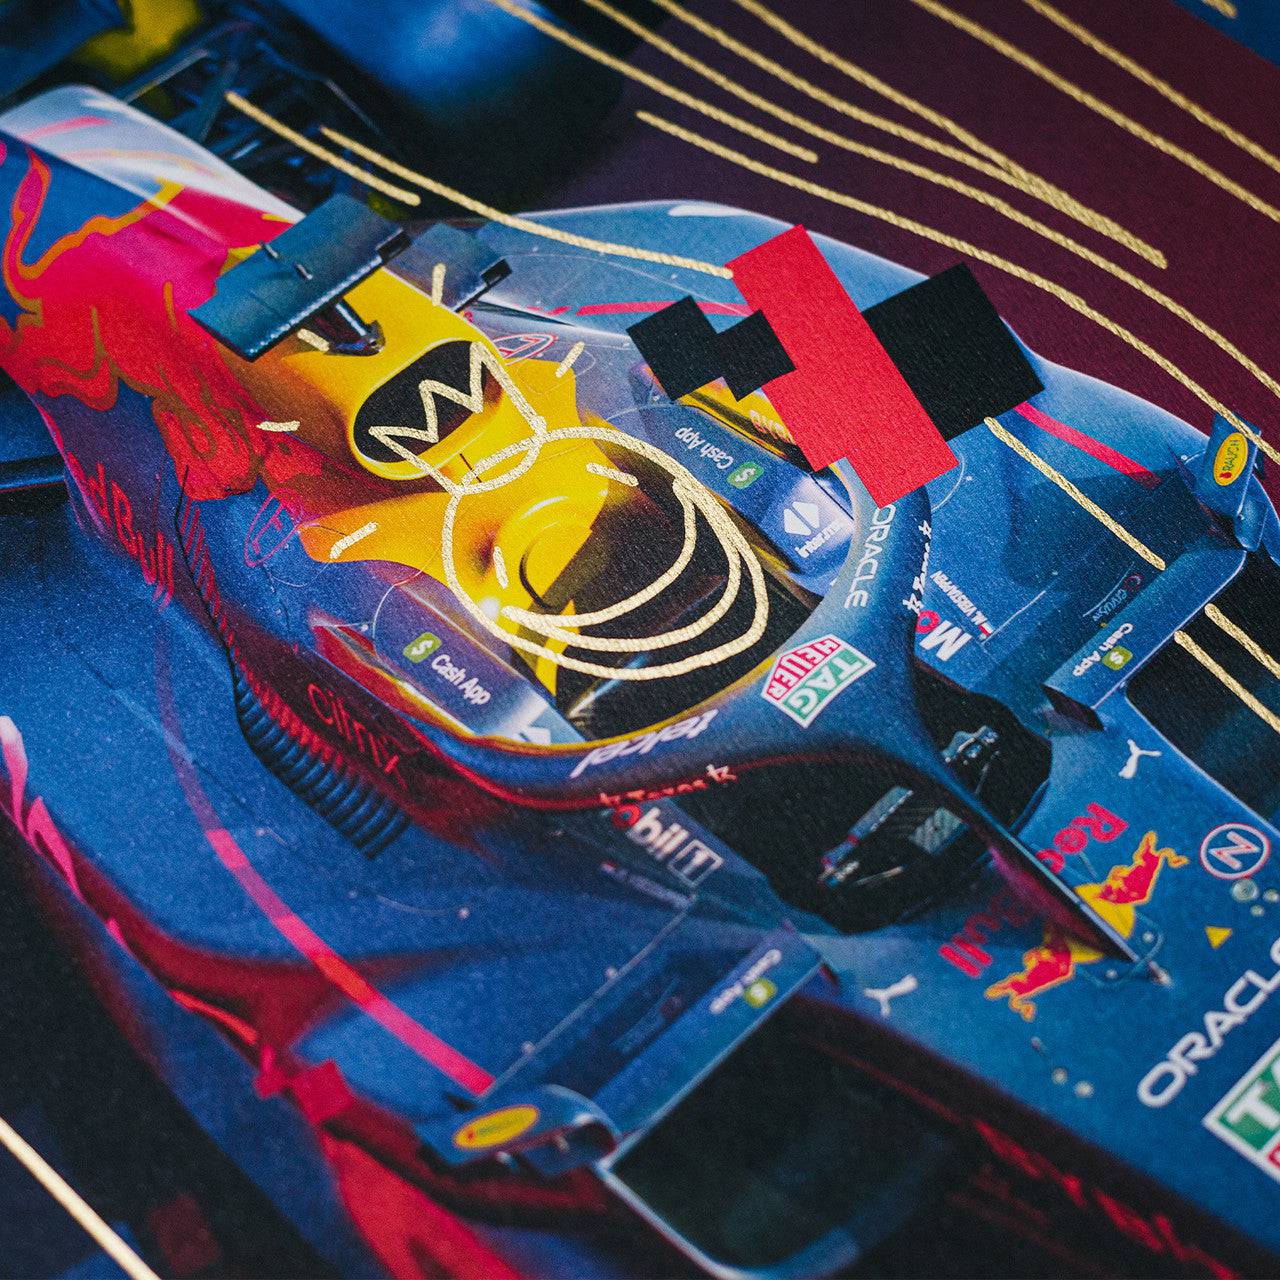 Oracle Red Bull Racing - Max Verstappen - Art to the Max - 2022 | Art Edition | #22/25